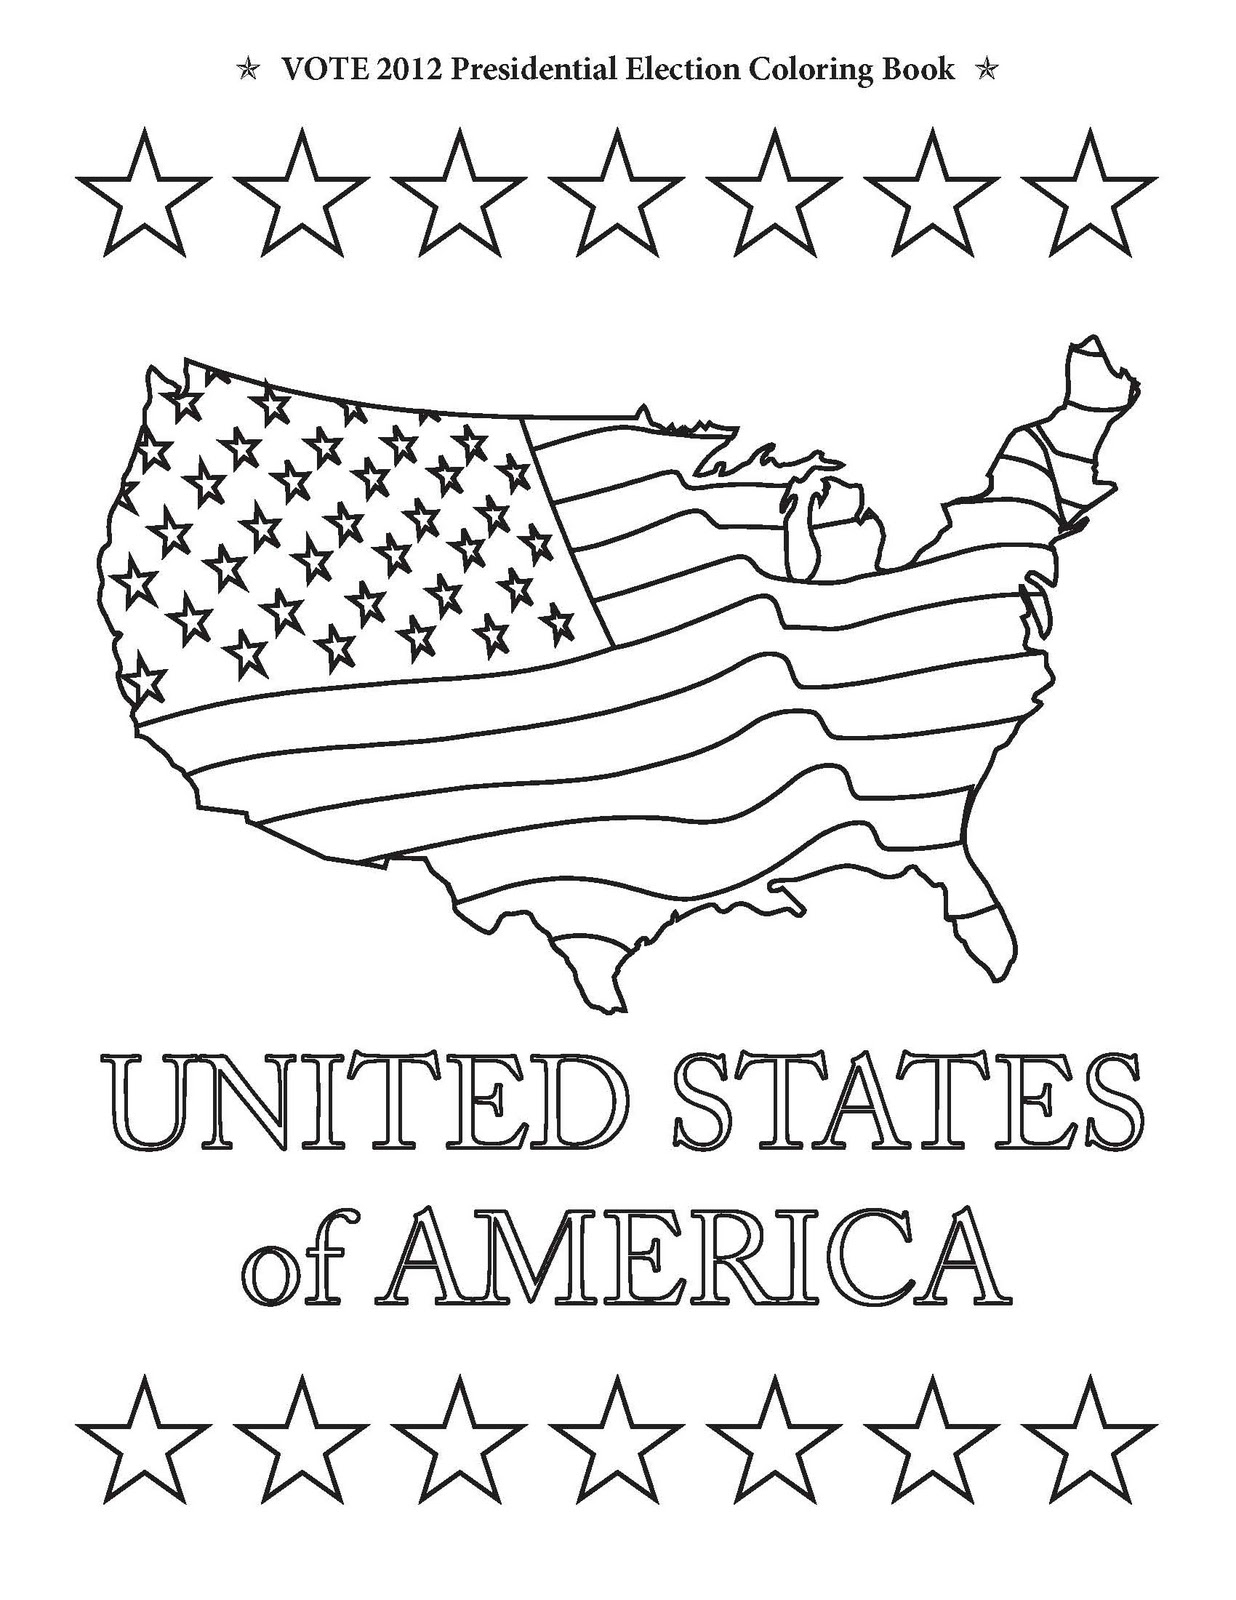 Map United States Color Election Stars, USA Map, and United States of America from Vote 2012 Presidential Election Coloring Book